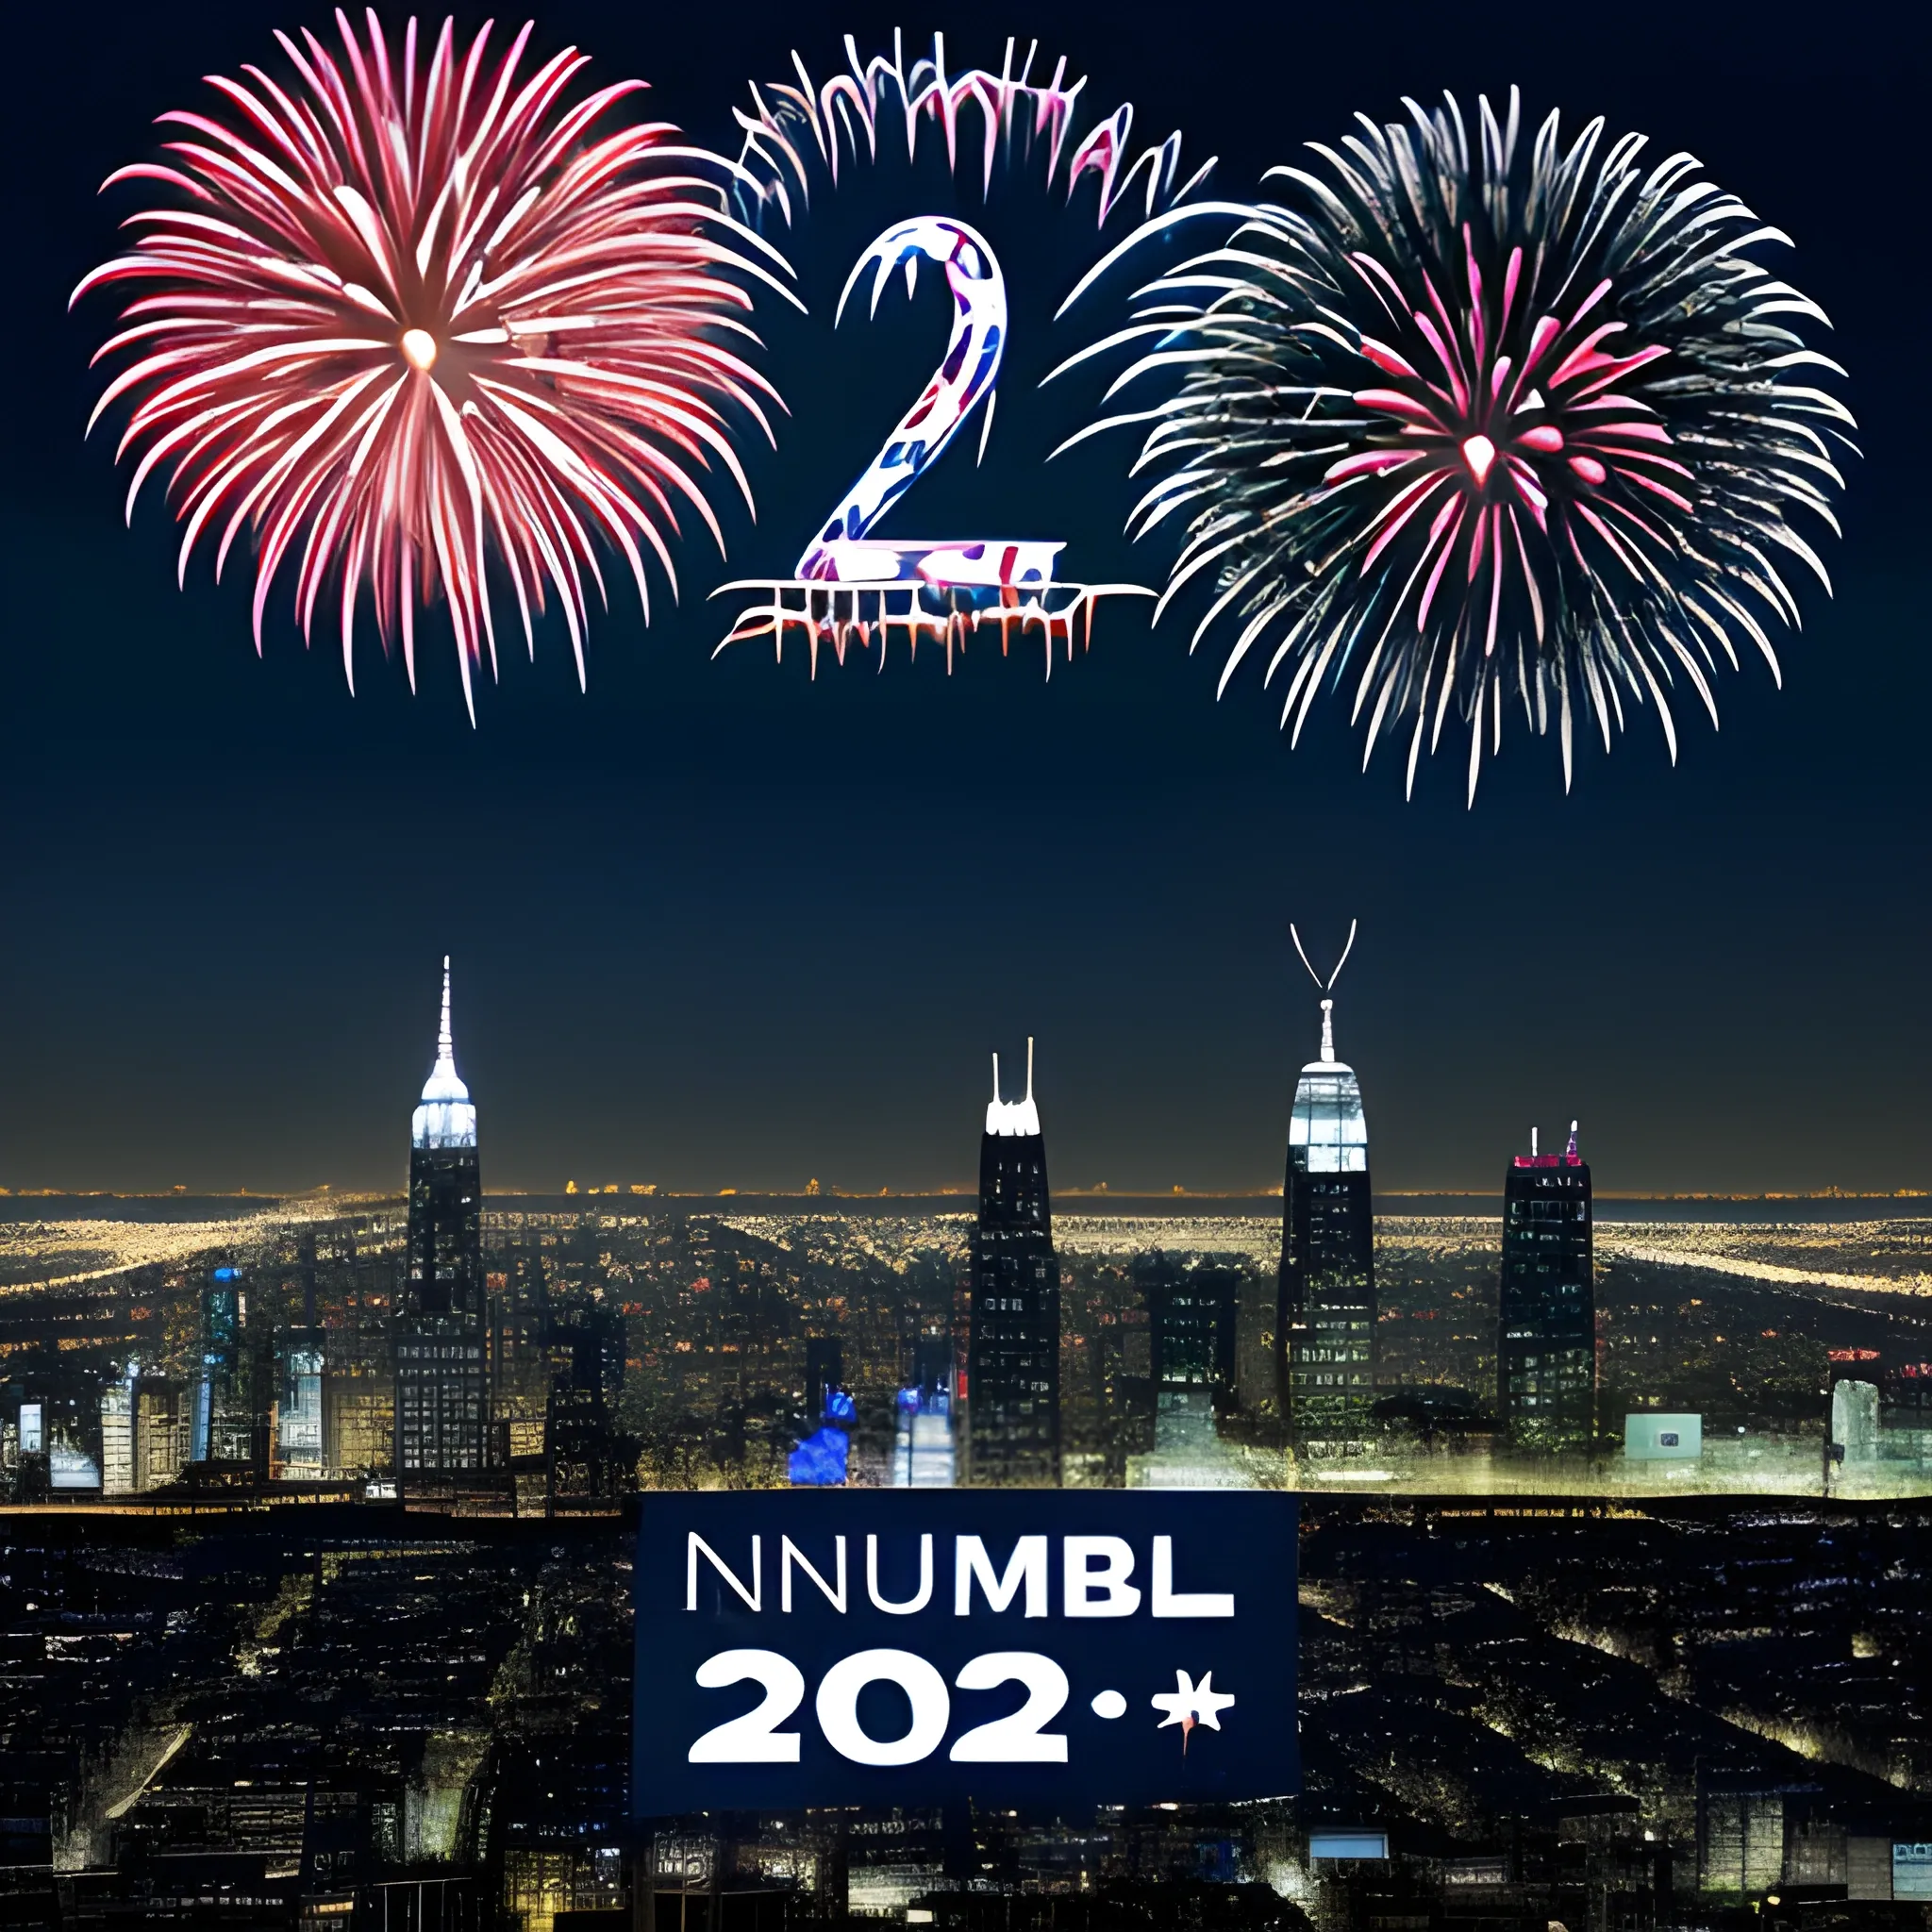 the number 2024 made by fireworks, with a city at night in the background